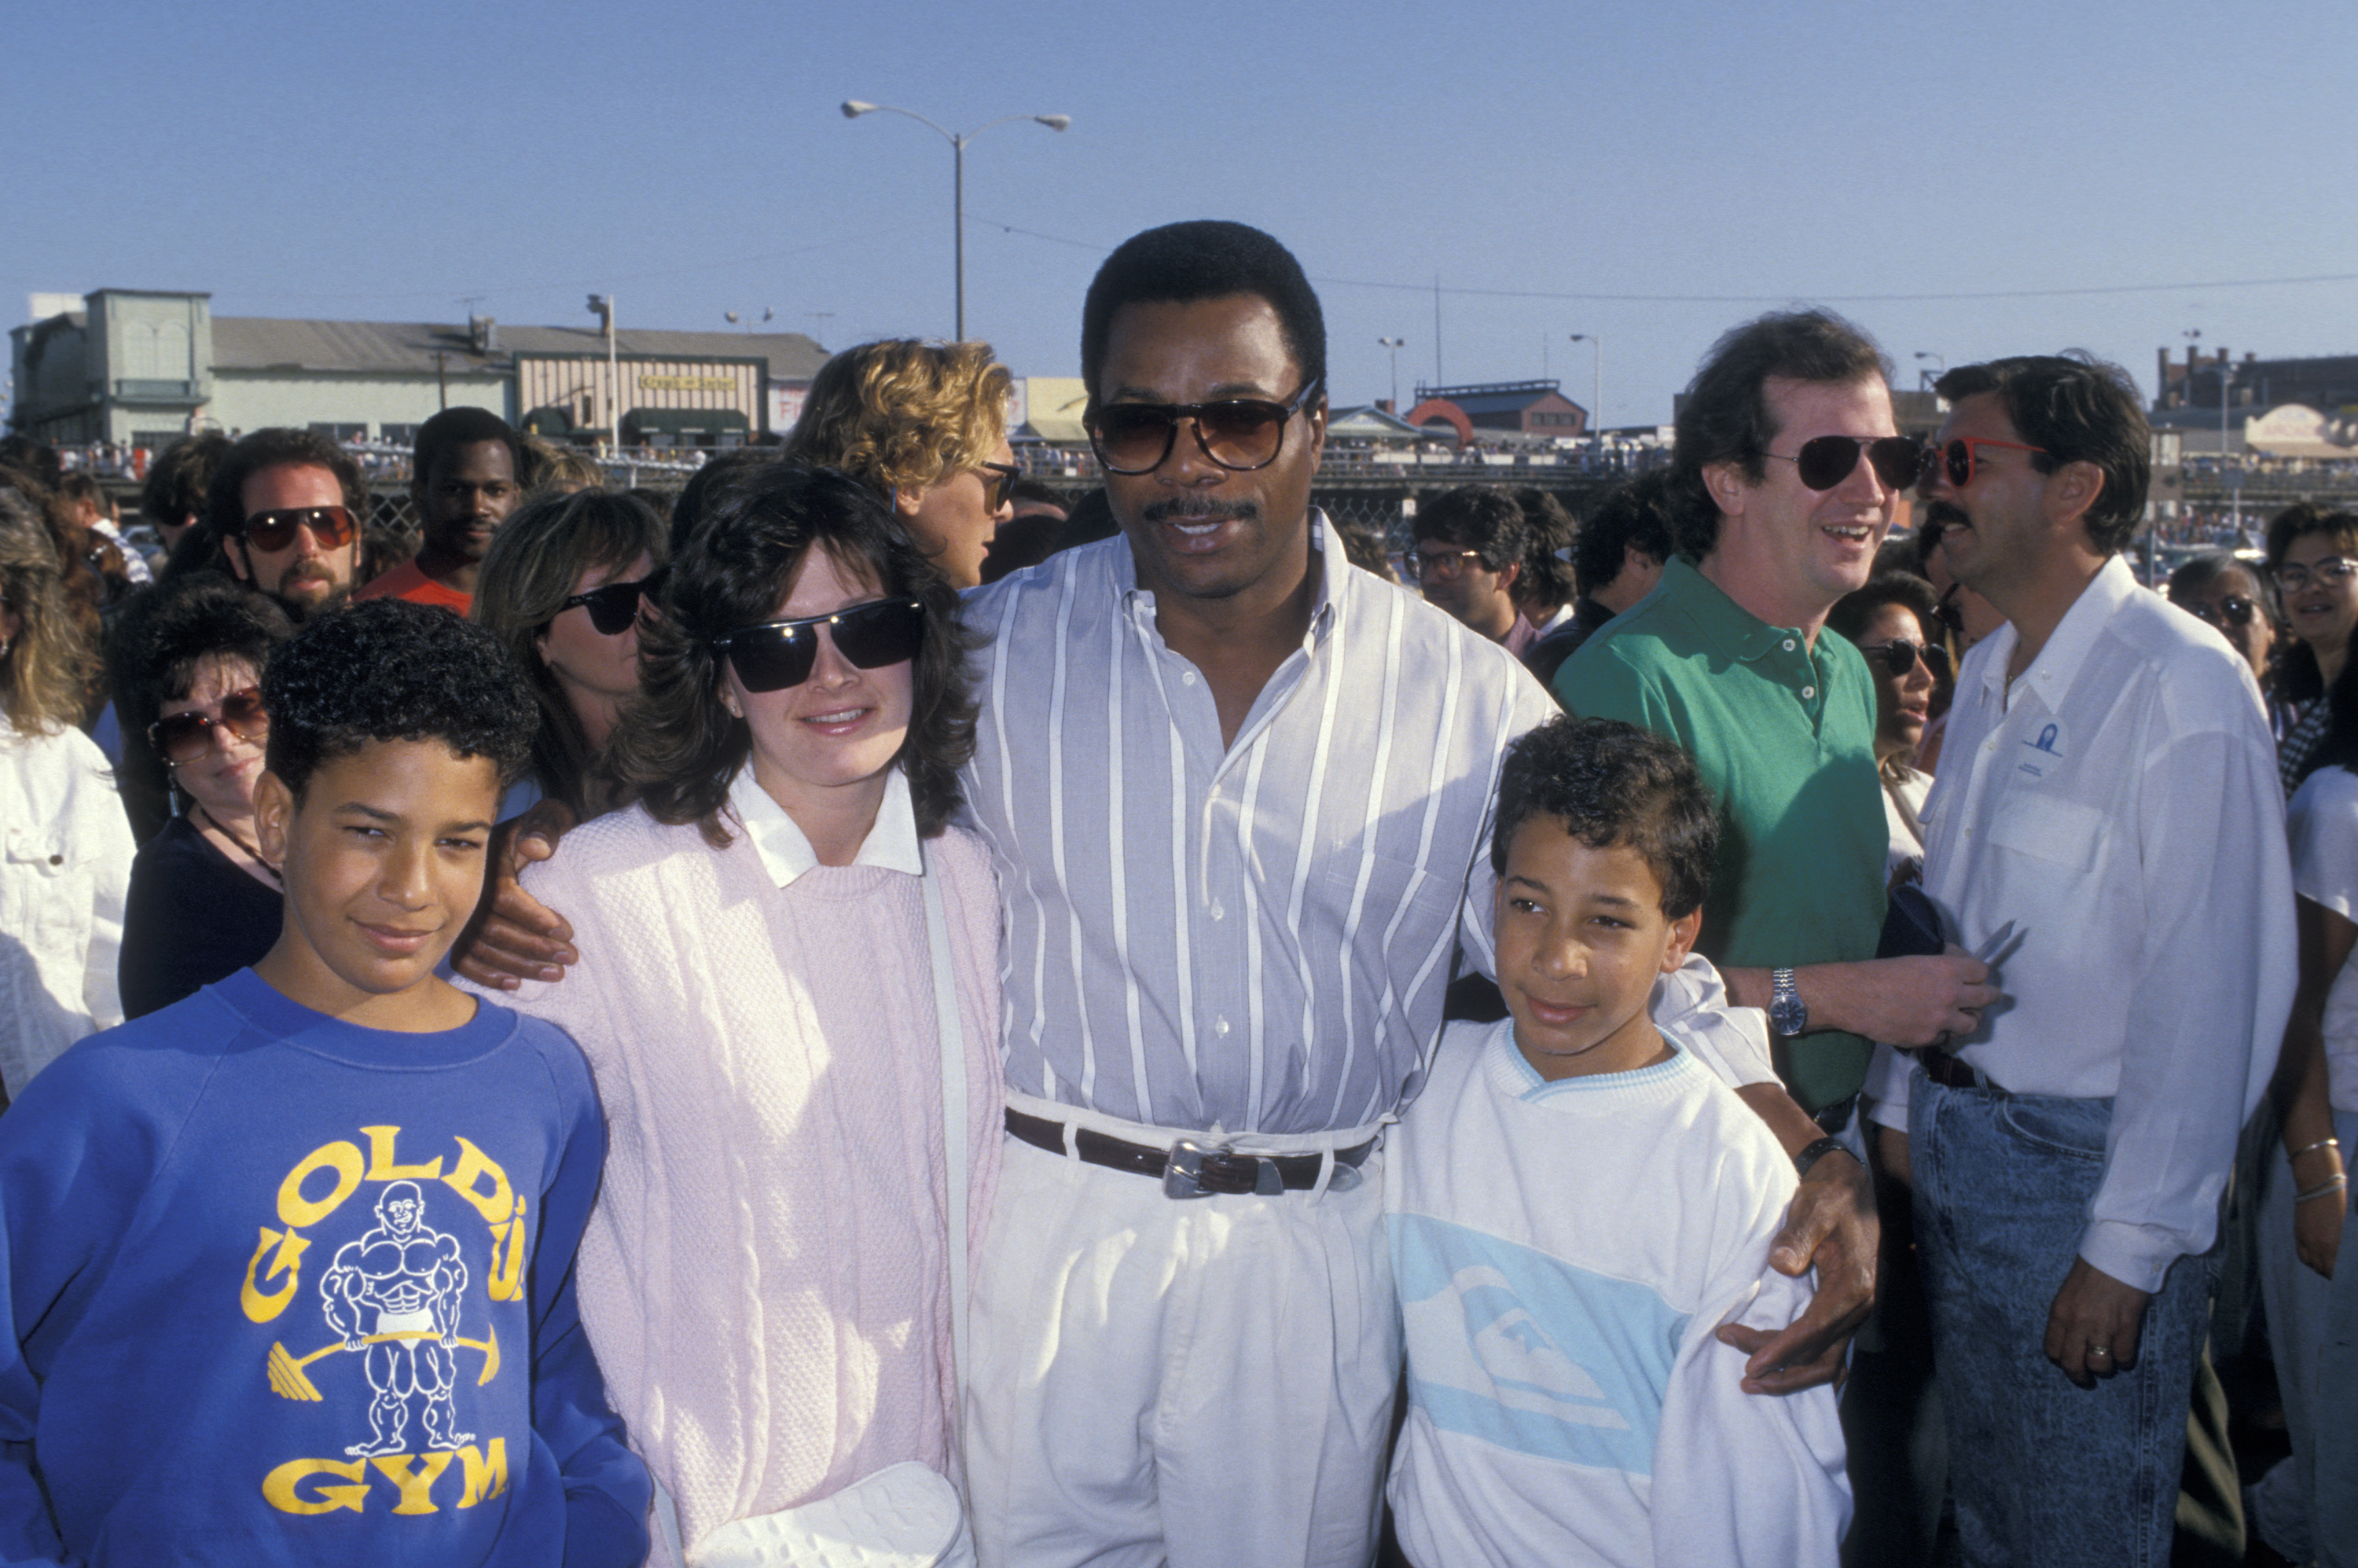 Actor Carl Weathers, wife and family attending Cirque du Soleil performance on March 27, 1988 at the Santa Monica Pier in Santa Monica, California. | Source: Getty Images